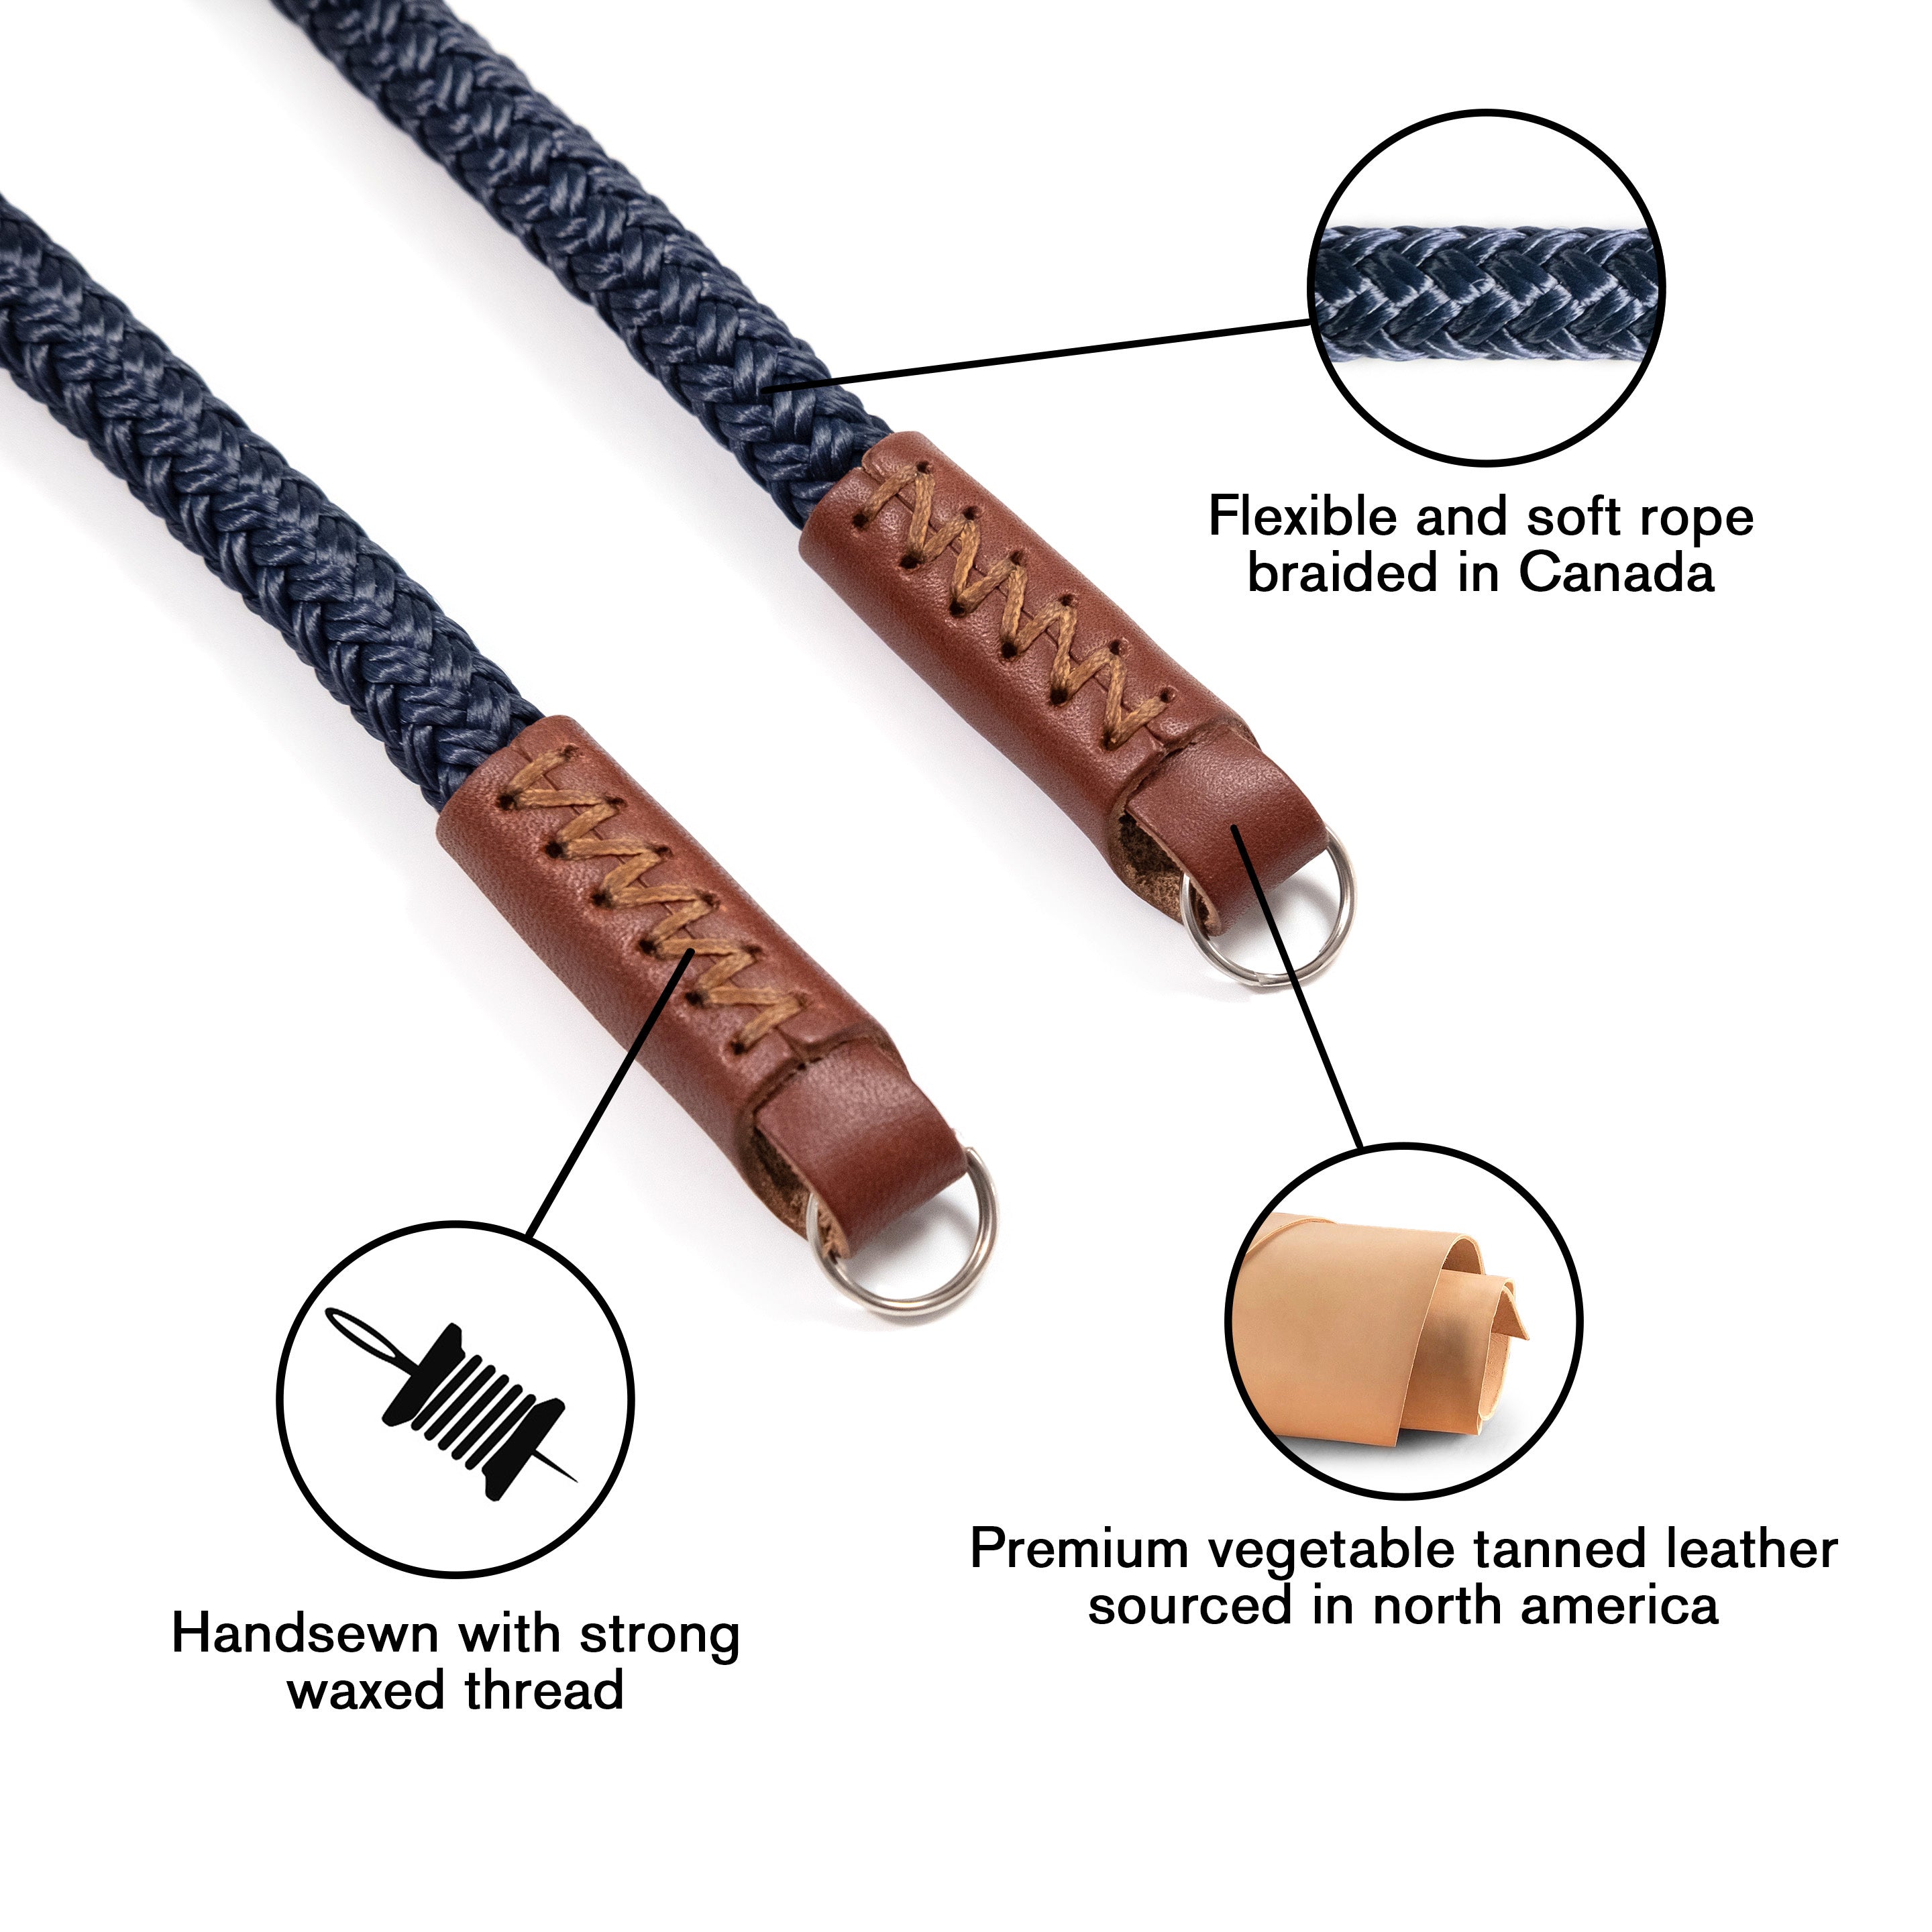 Fab' F8 strap - Blue rope, brown leather - Size XL (55")